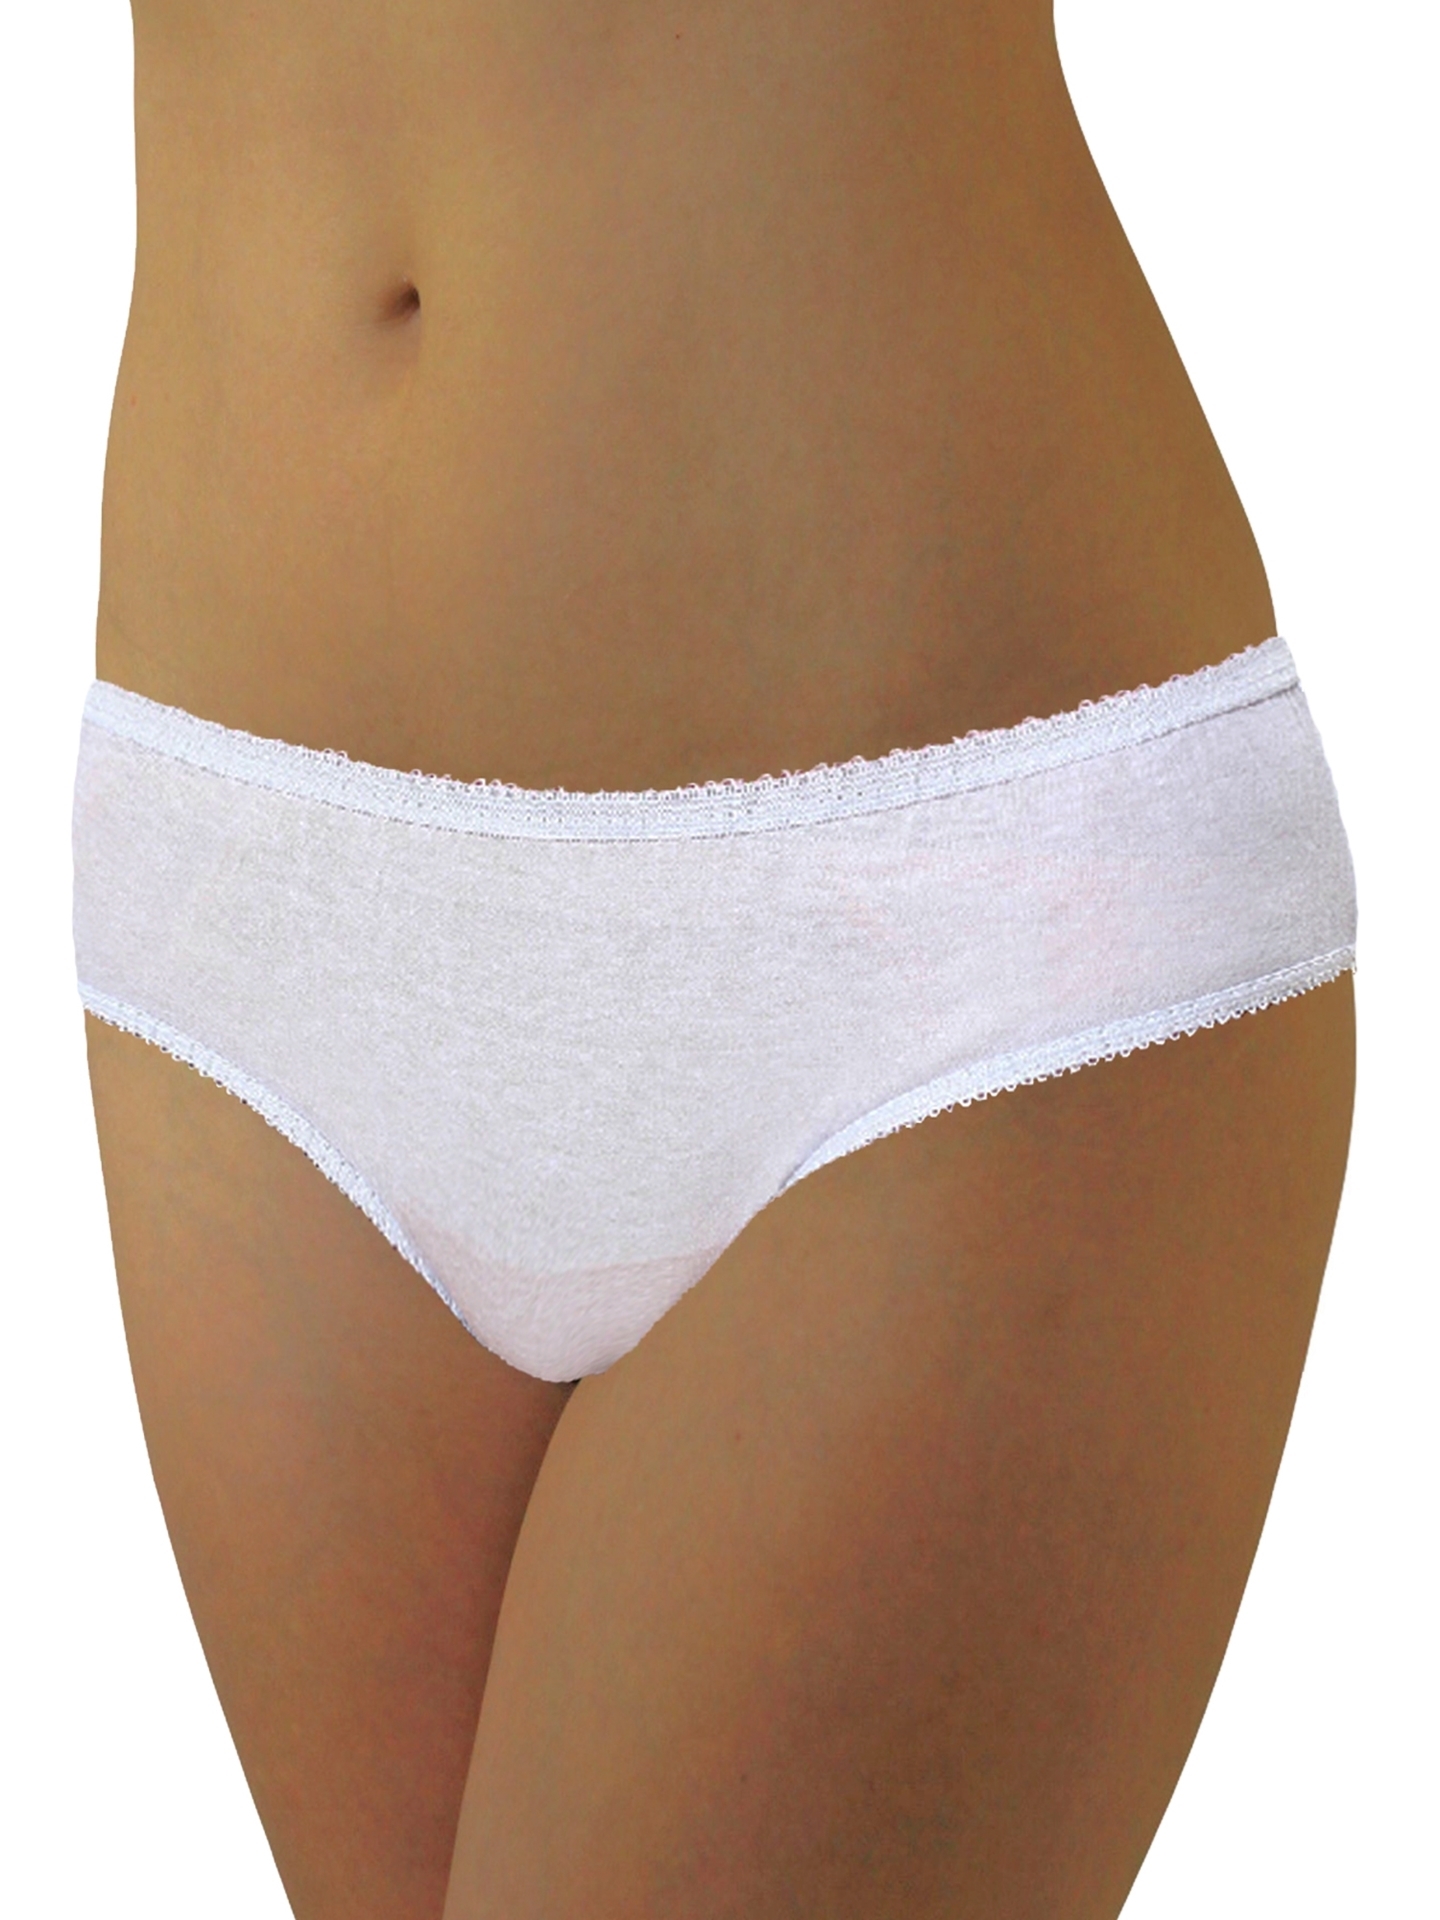 100% Cotton Briefs WoodyKnows Womens Disposable Underwear Individually Wrapped 